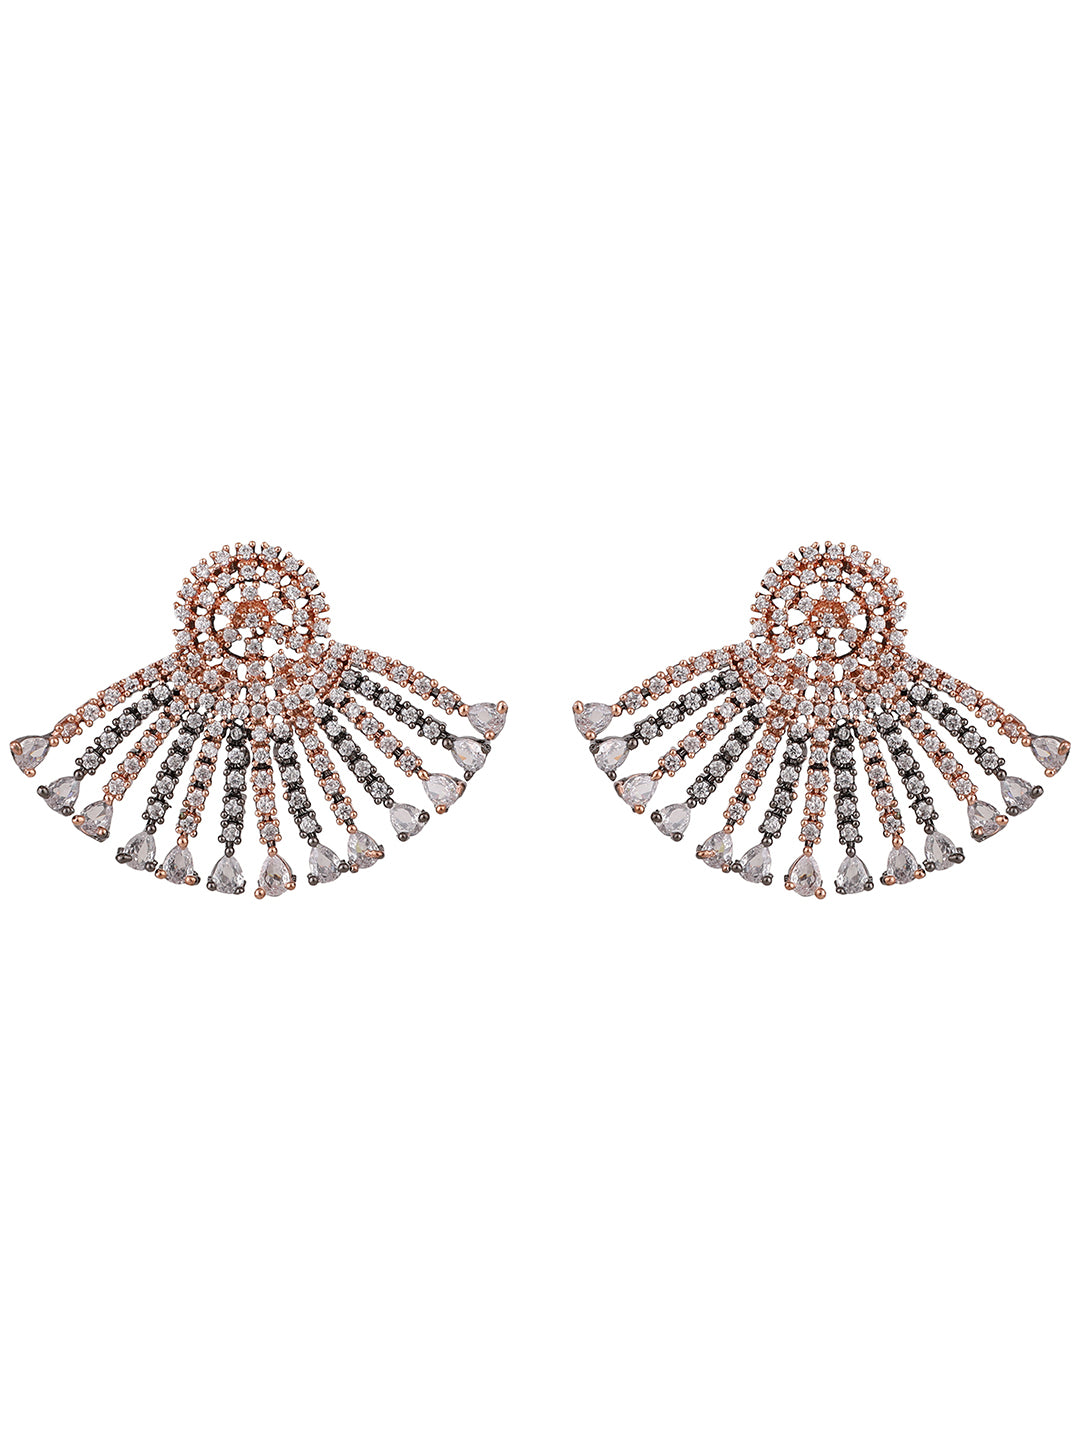 Women's Rhodium-Plated AD Studded Oversized Contemporary Drop Earrings - Anikas Creation